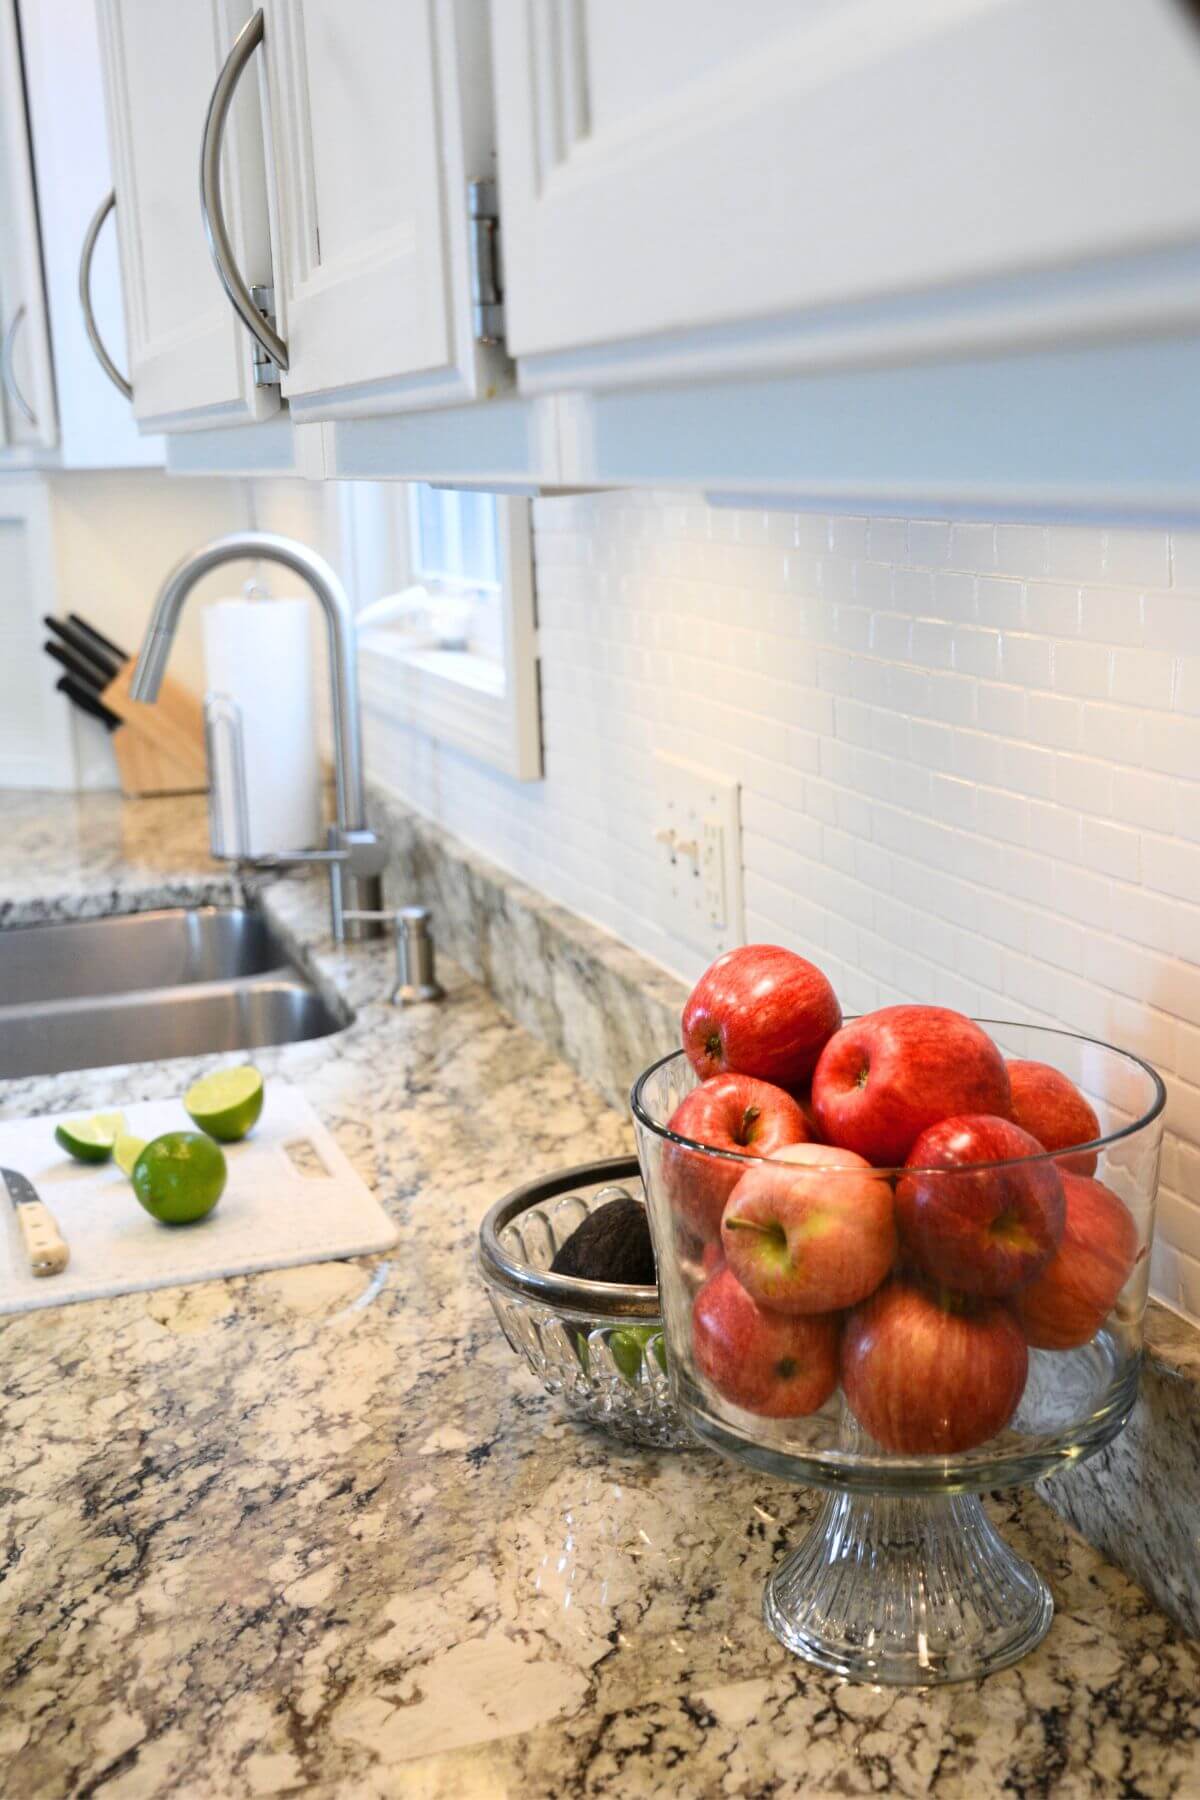 granite counters with white cabinets, backsplash and red apples in a glass dish.